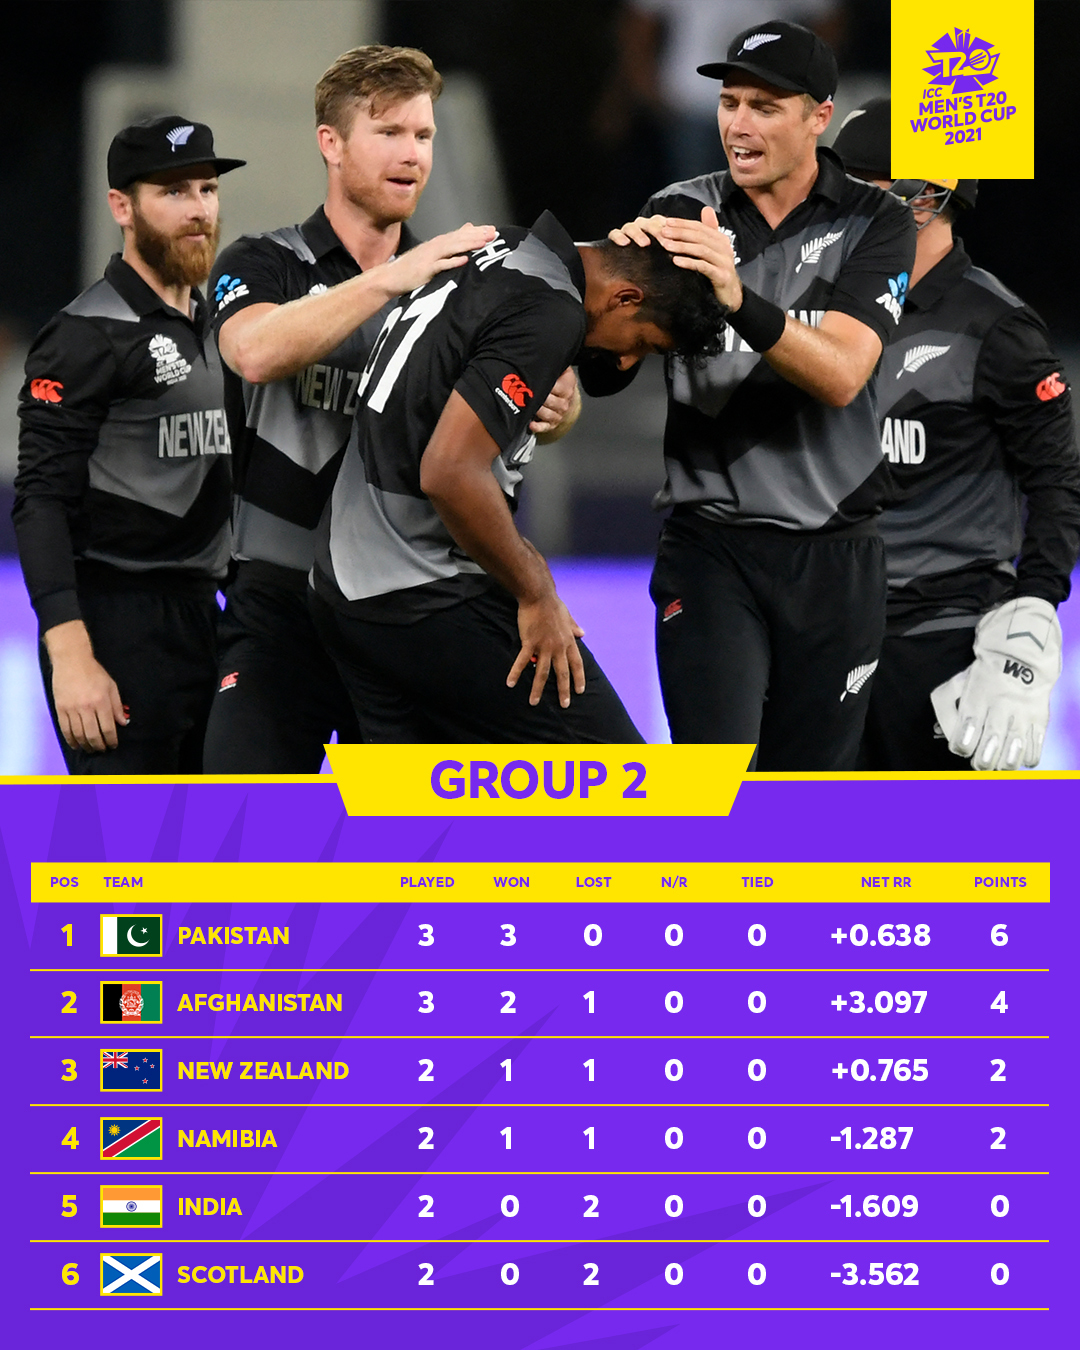 The worst defeat of the T20 World Cup India won the worst honor while playing against New Zealand.